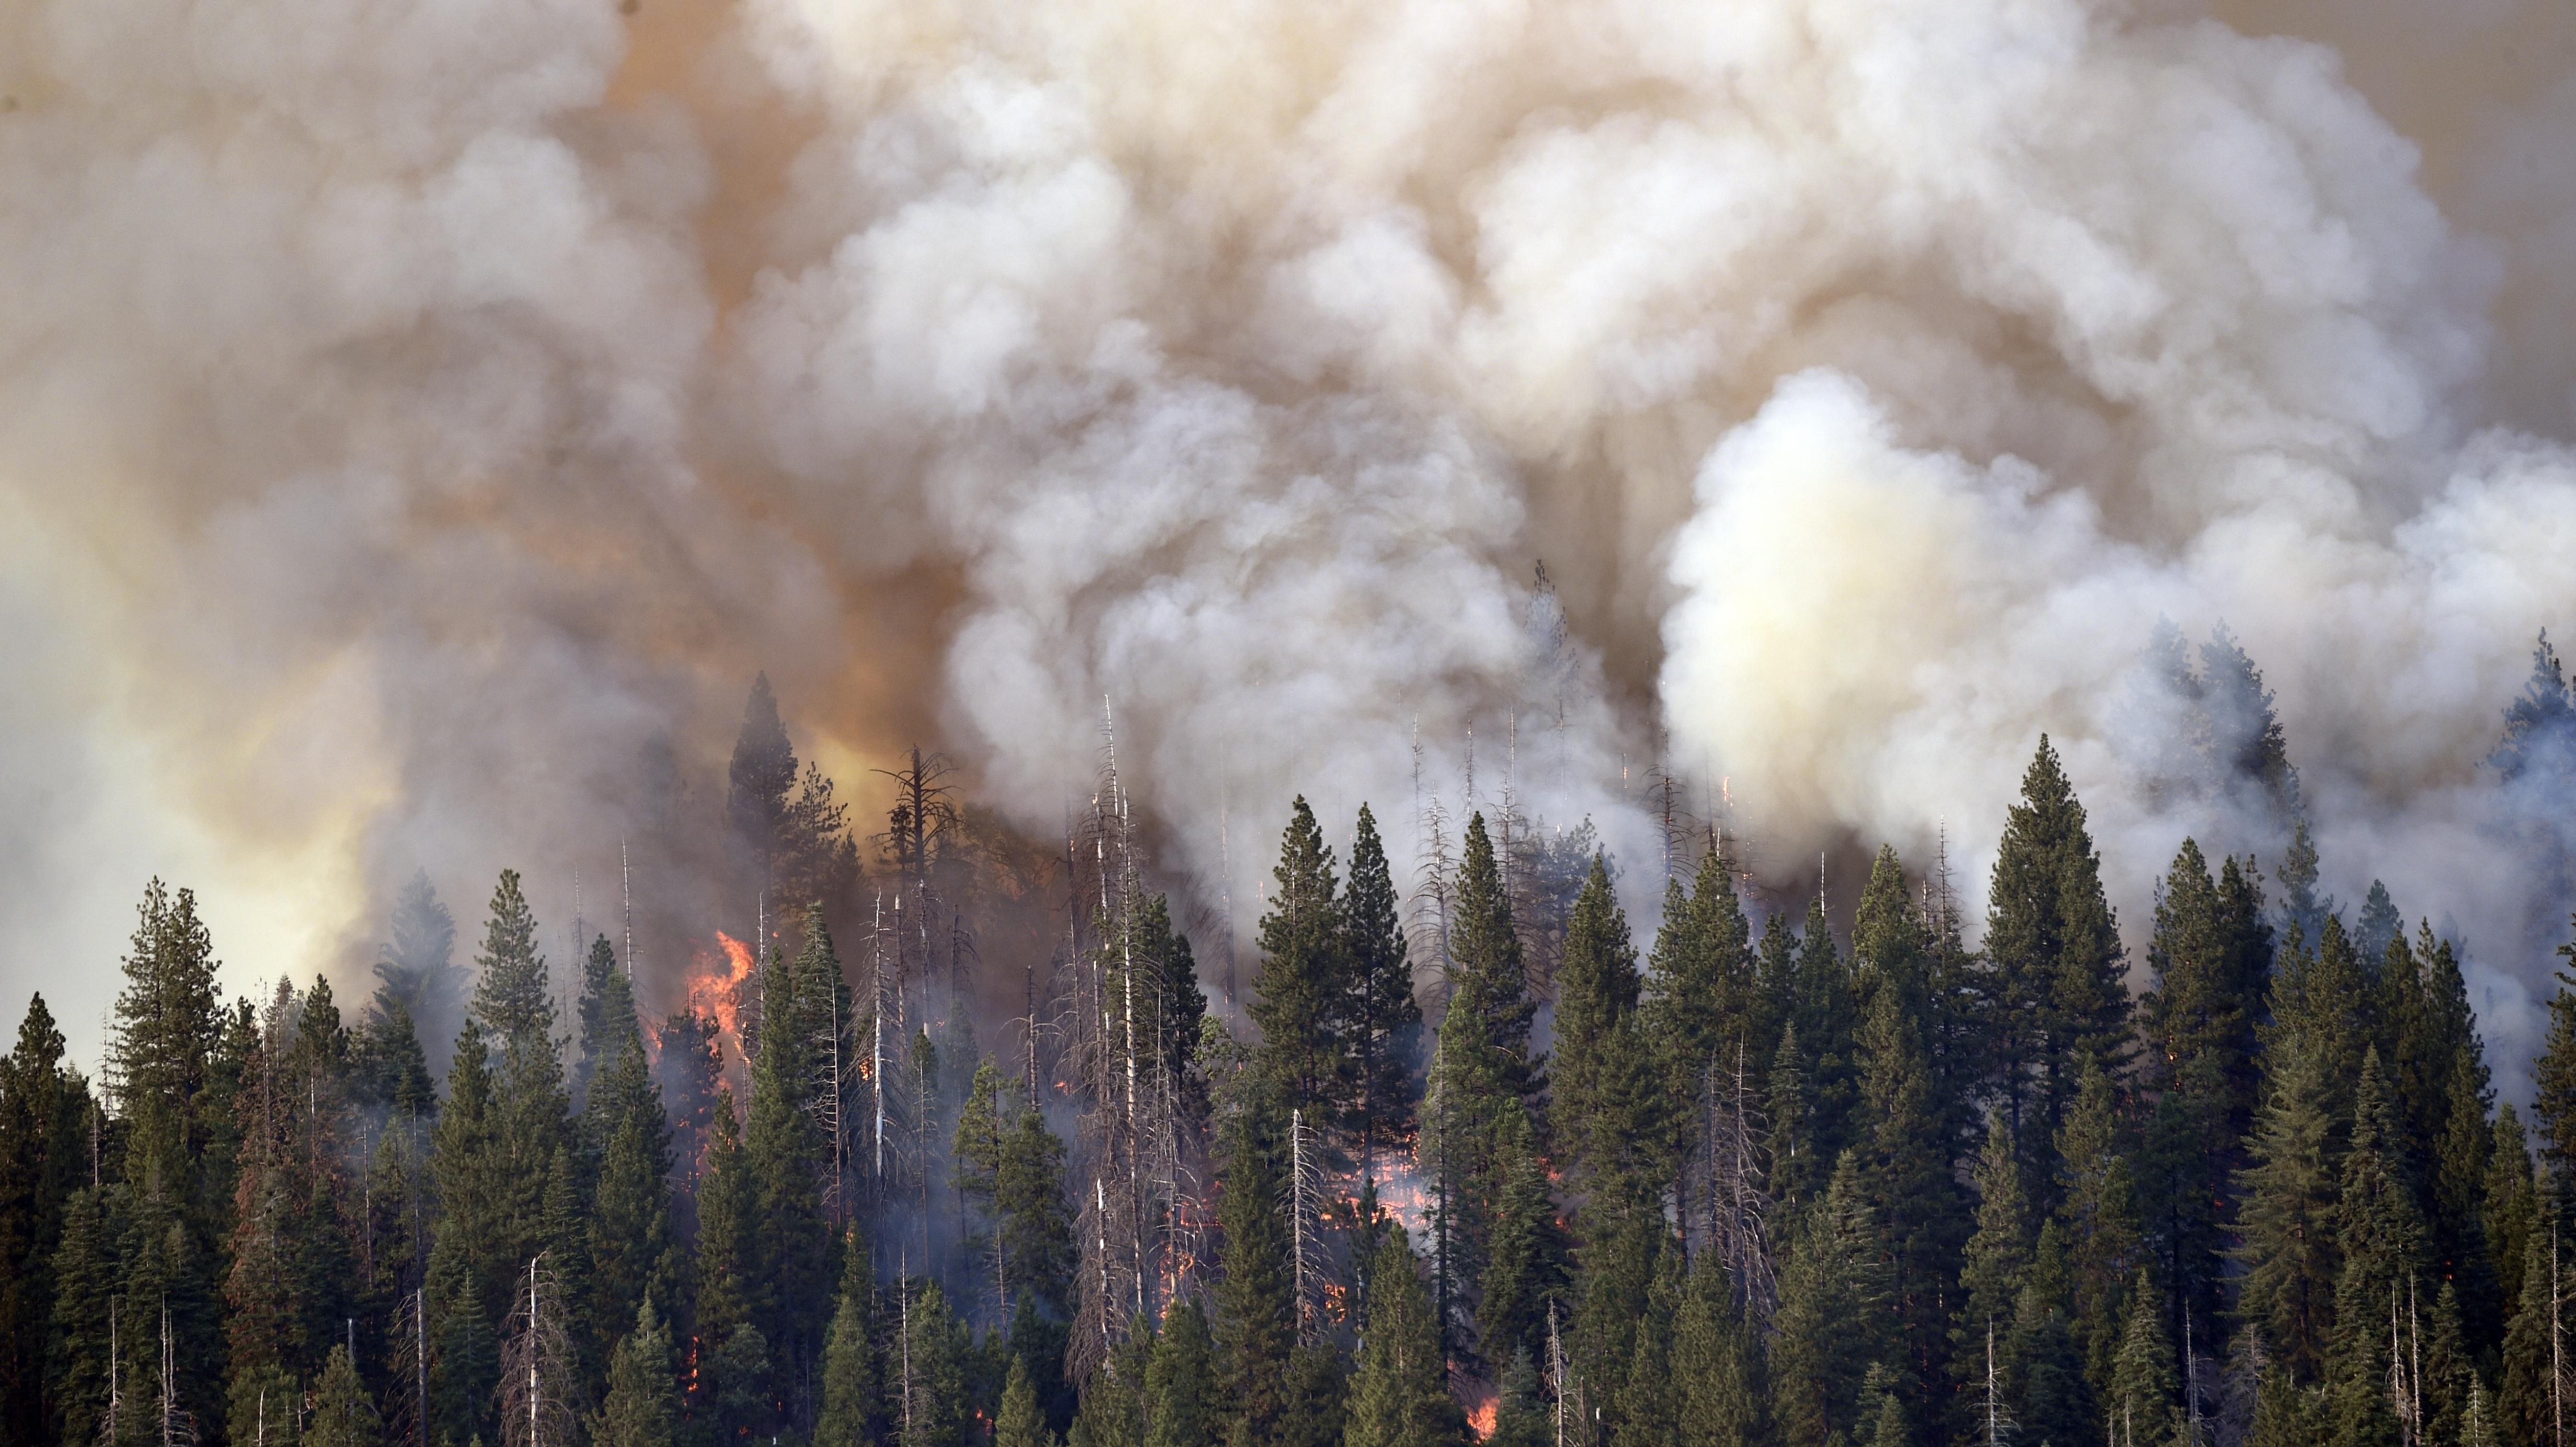 Smoke and flames rise as the Washburn Fire burns around the Mariposa Grove of giant sequoias at Yosemite National Park in California on July 10, 2022.